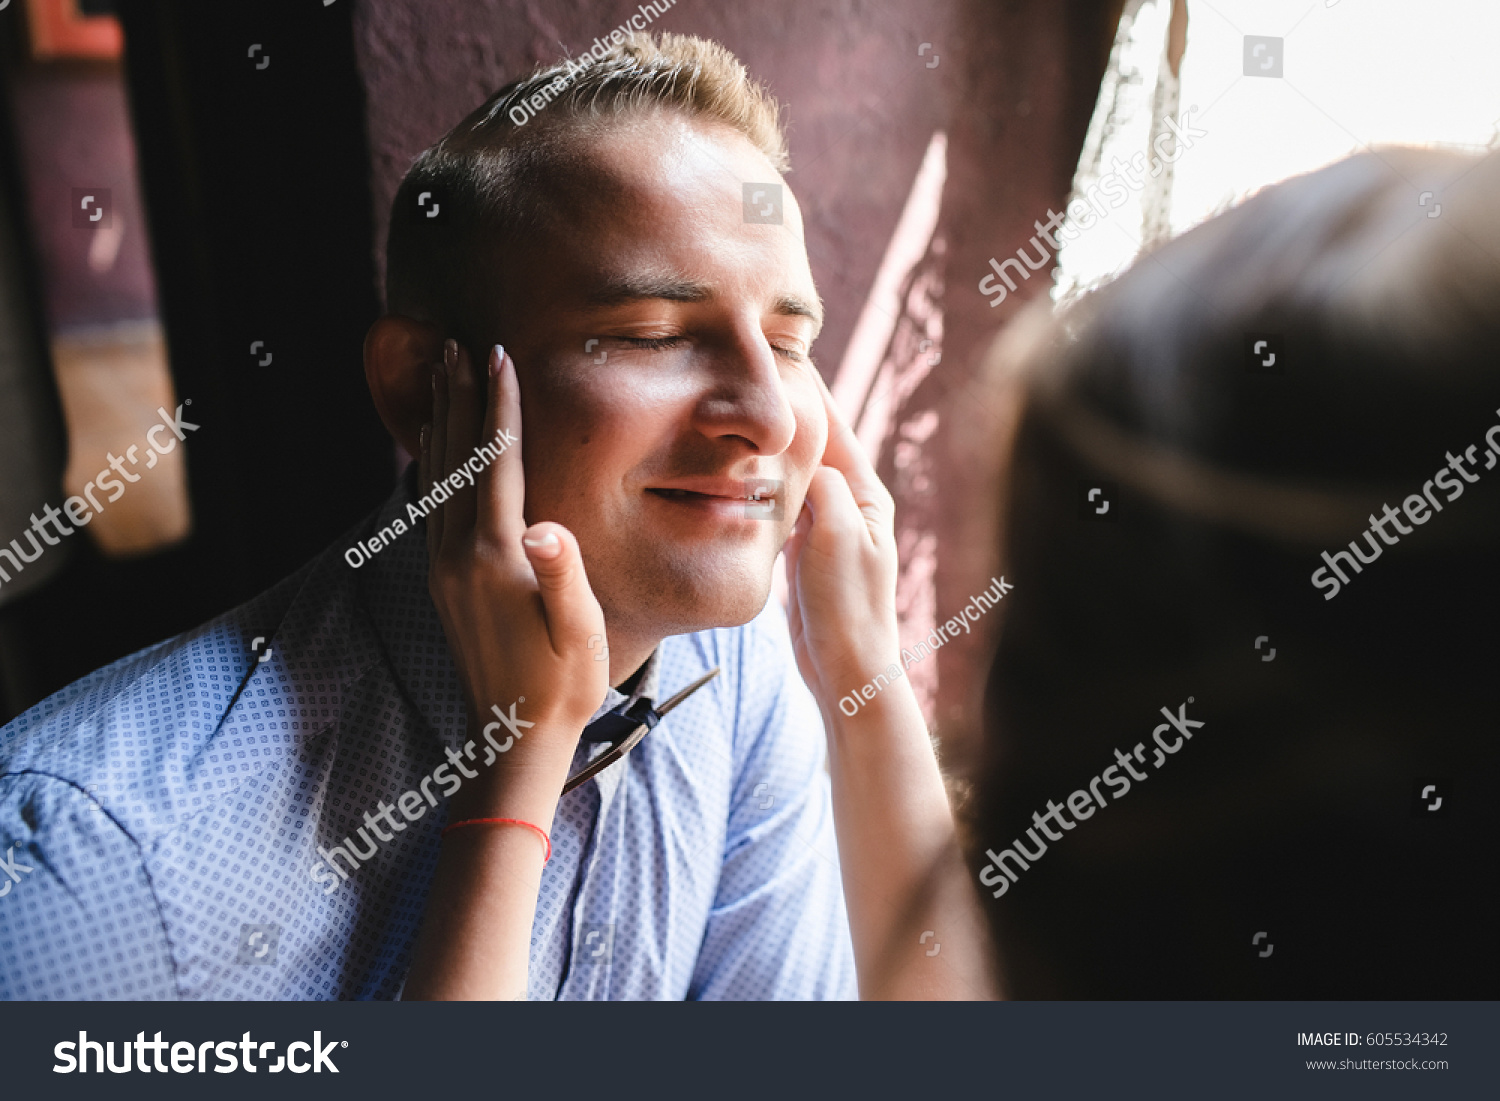 Man enjoys woman's touch sitting before the window #605534342